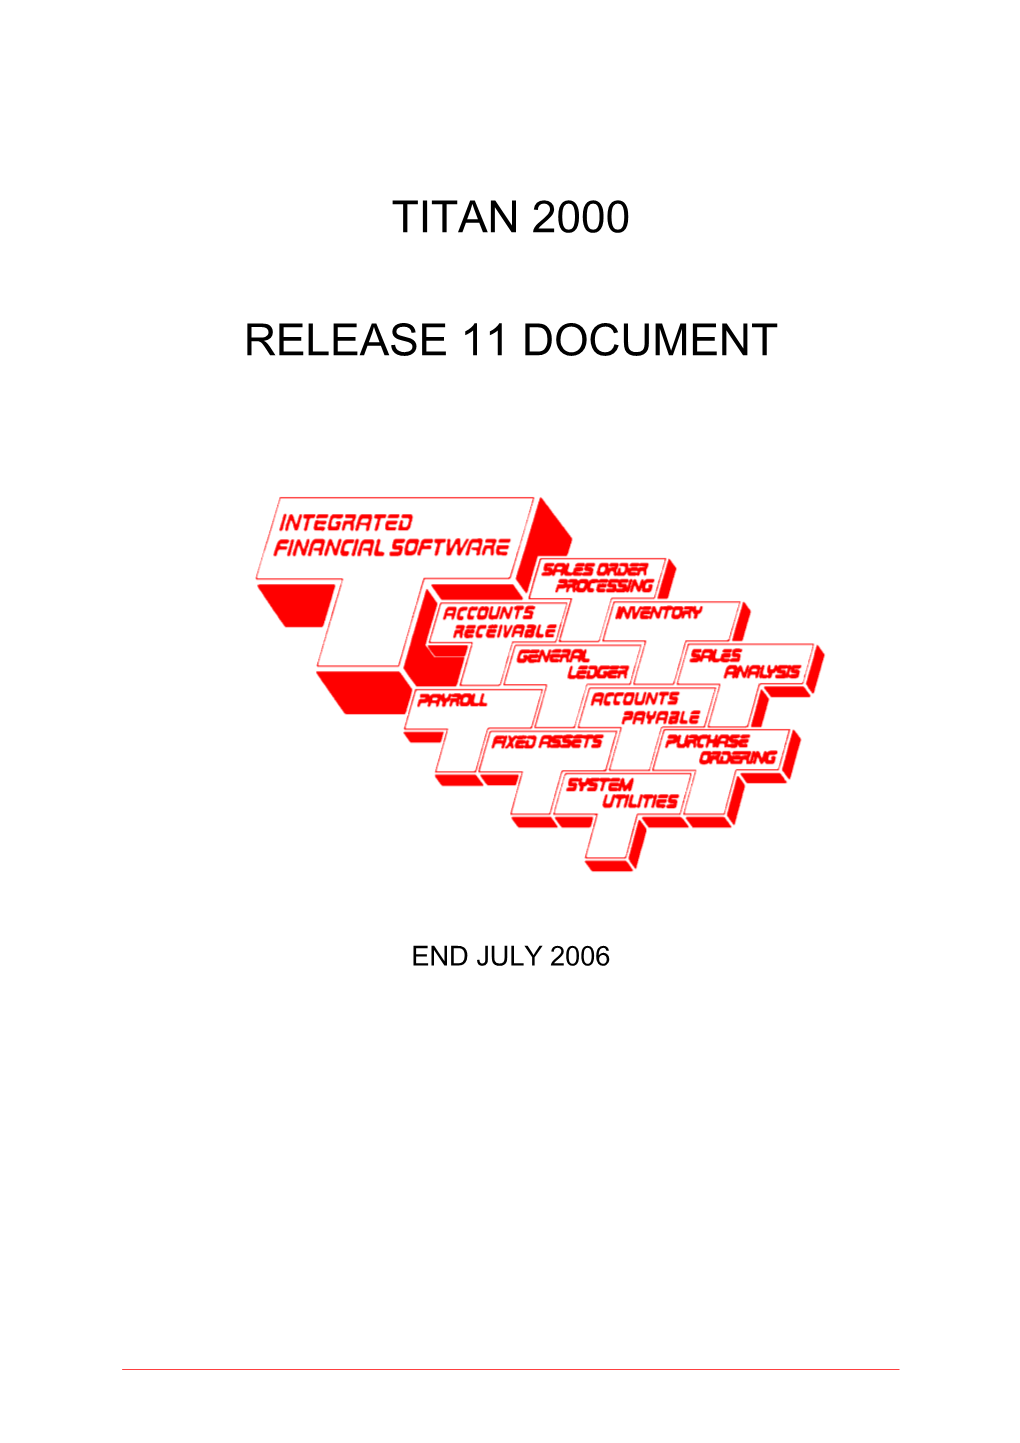 Release 11 Document